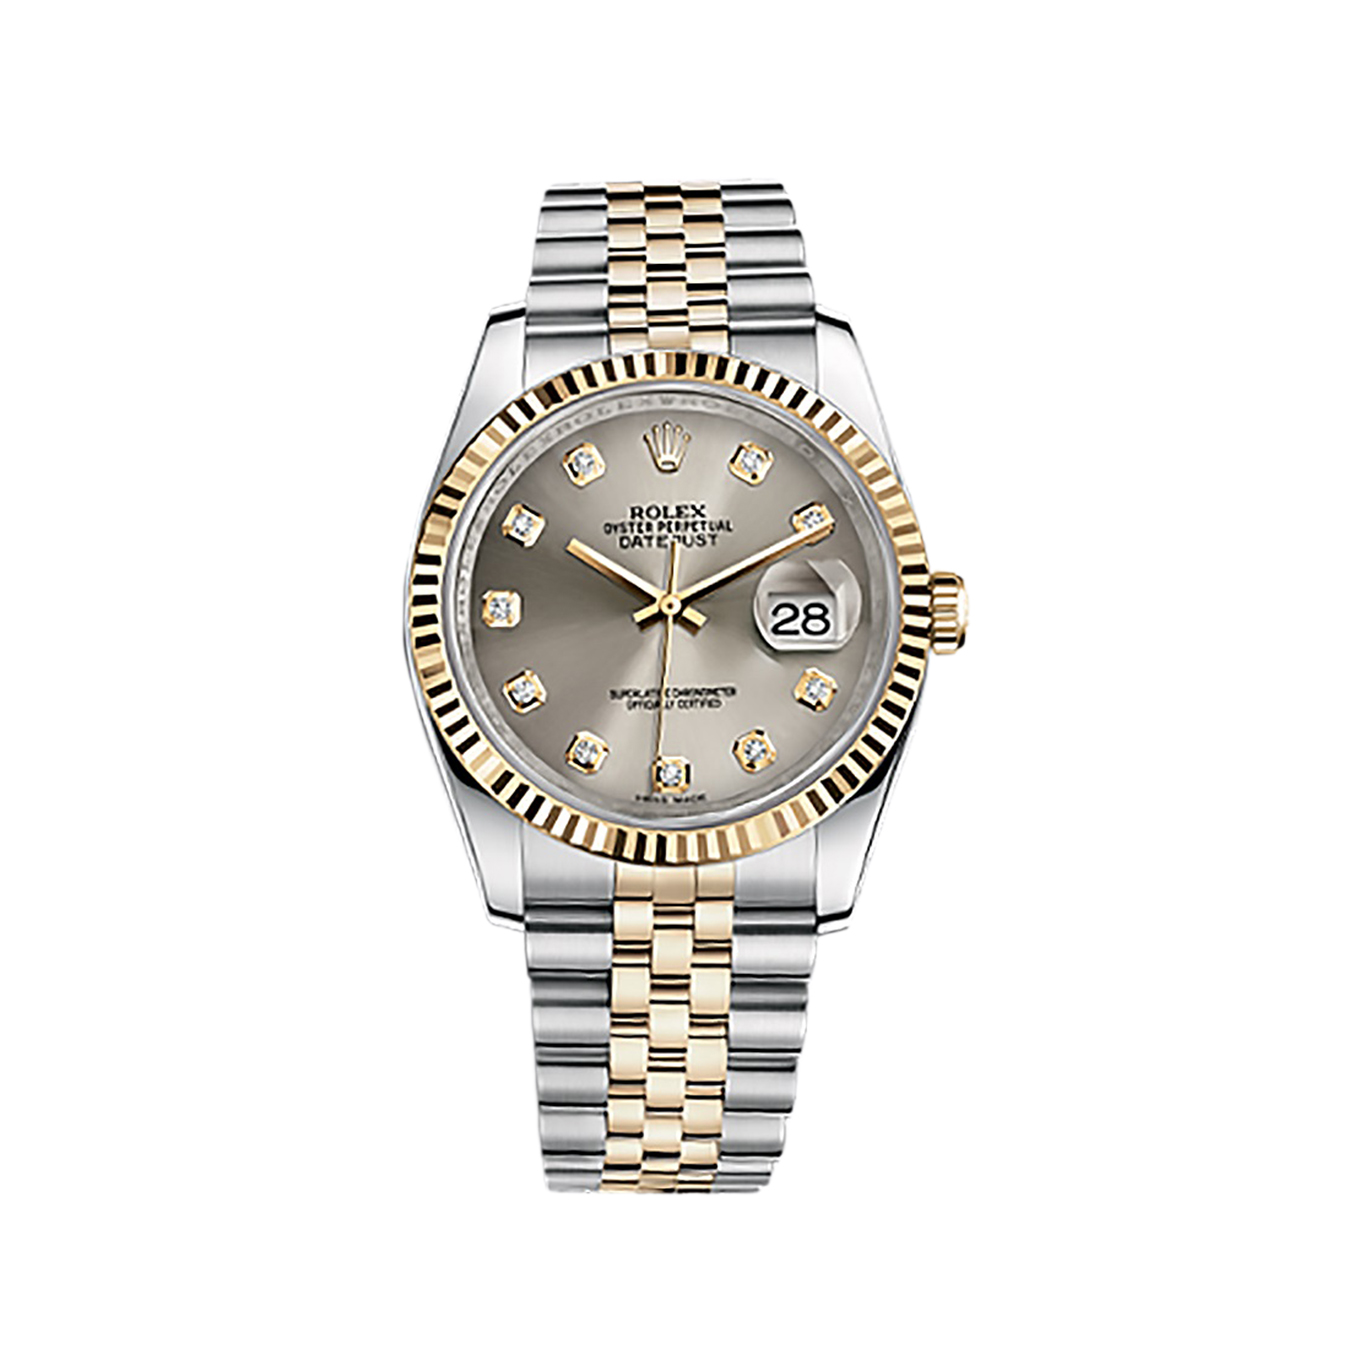 Datejust 36 116233 Gold & Stainless Steel Watch (Steel Set with Diamonds)